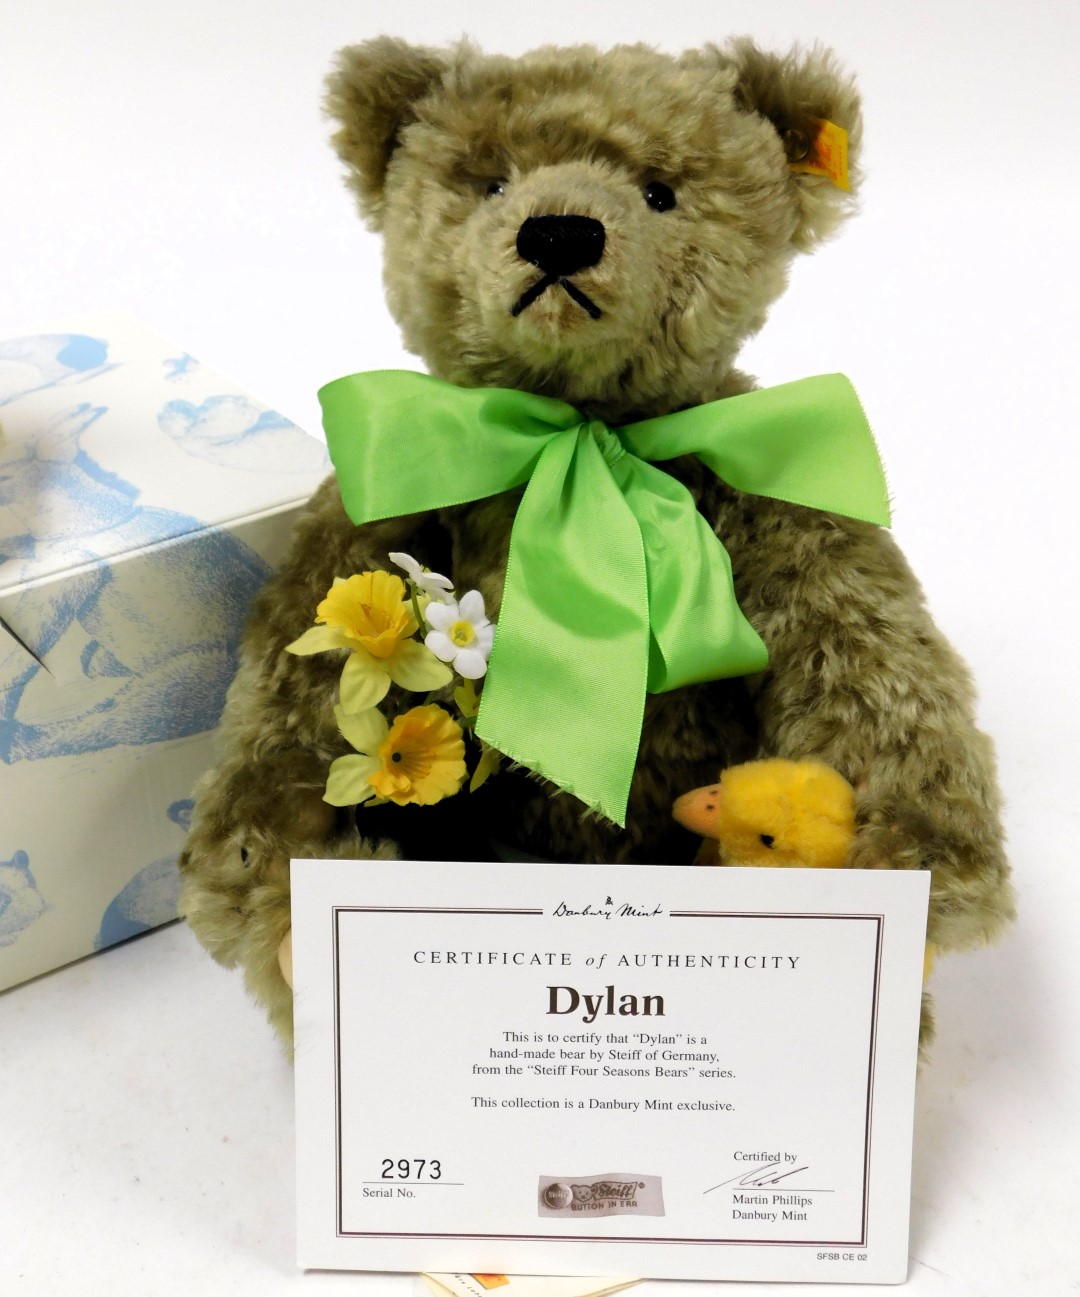 A Steiff William and Catherine The Royal Wedding Teddy bear, exclusive to Danbury Mint, limited edit - Image 3 of 3